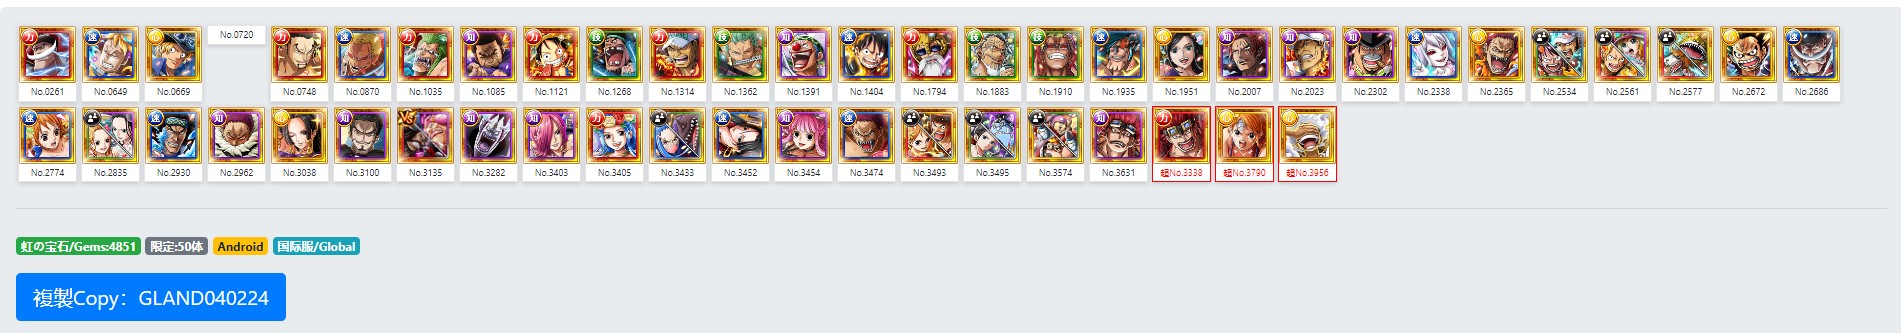 G5 Luffy Alot of Top Tier Char [Android] GLOBAL Best Starter Top Tier Characters 4800+ Gems Check Description